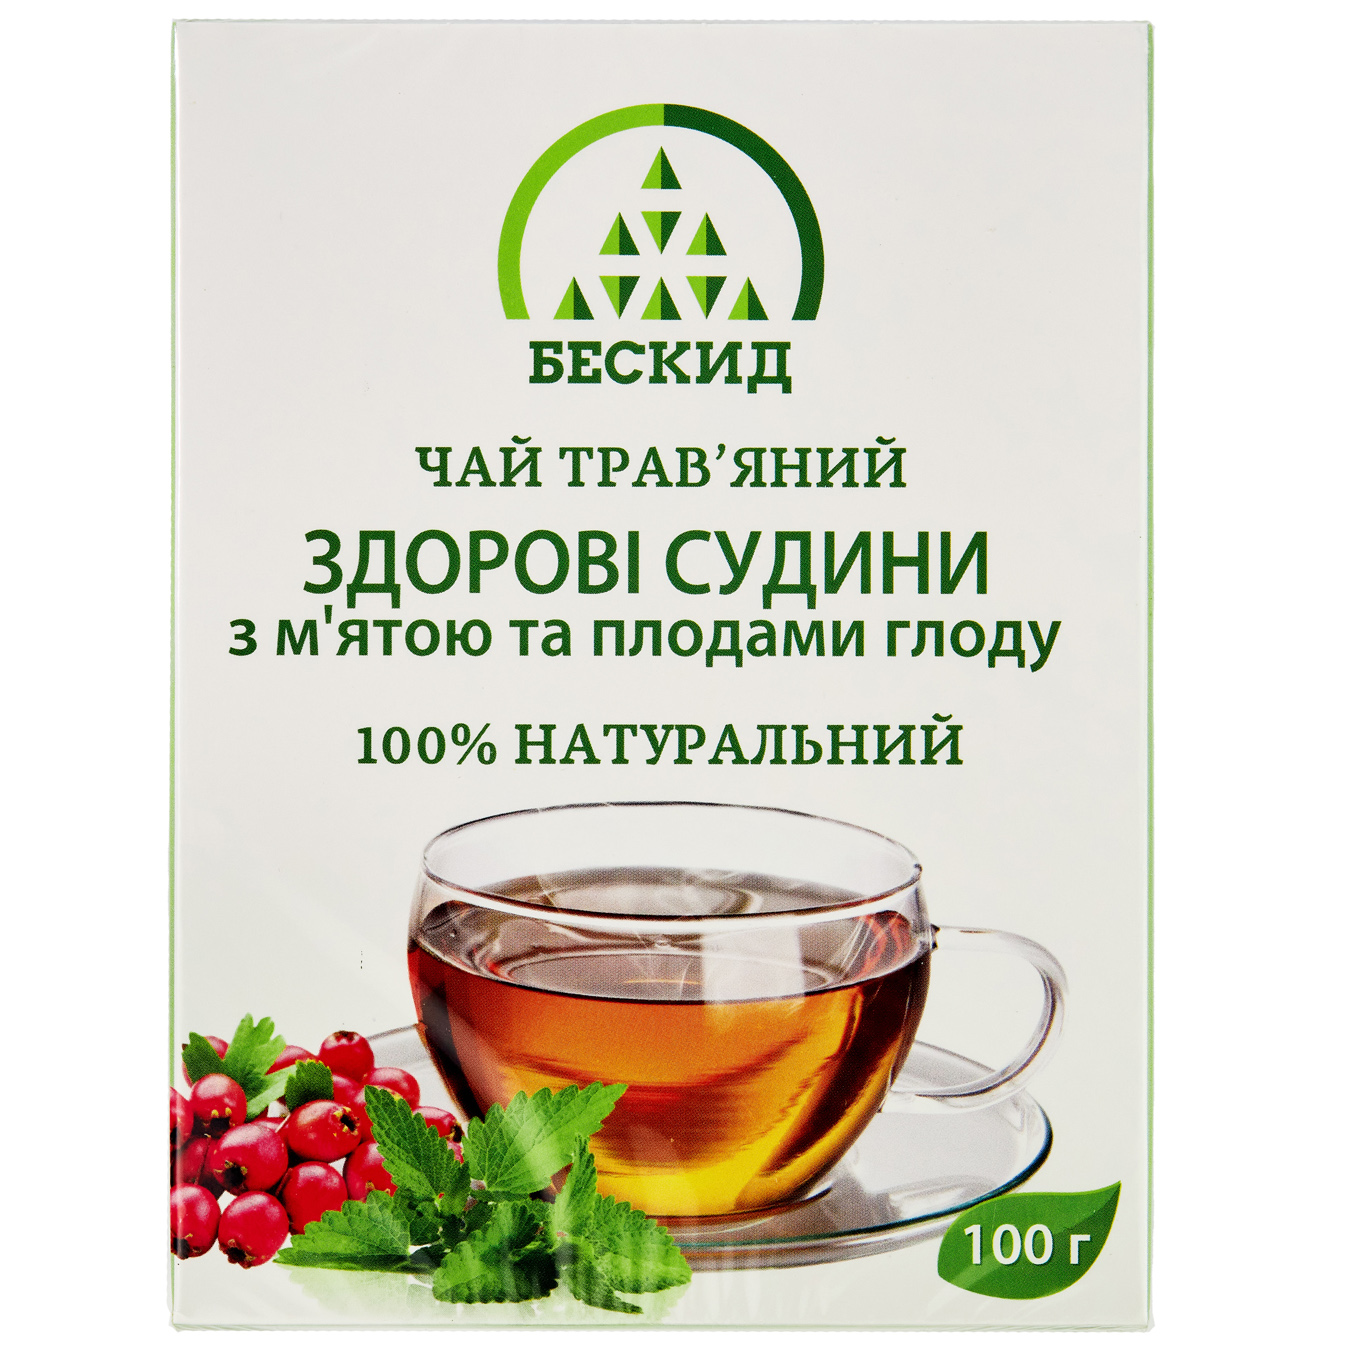 Beskyd Healthy Cessels Herbal Tea with Mint and Hawthorn Fruits 100g